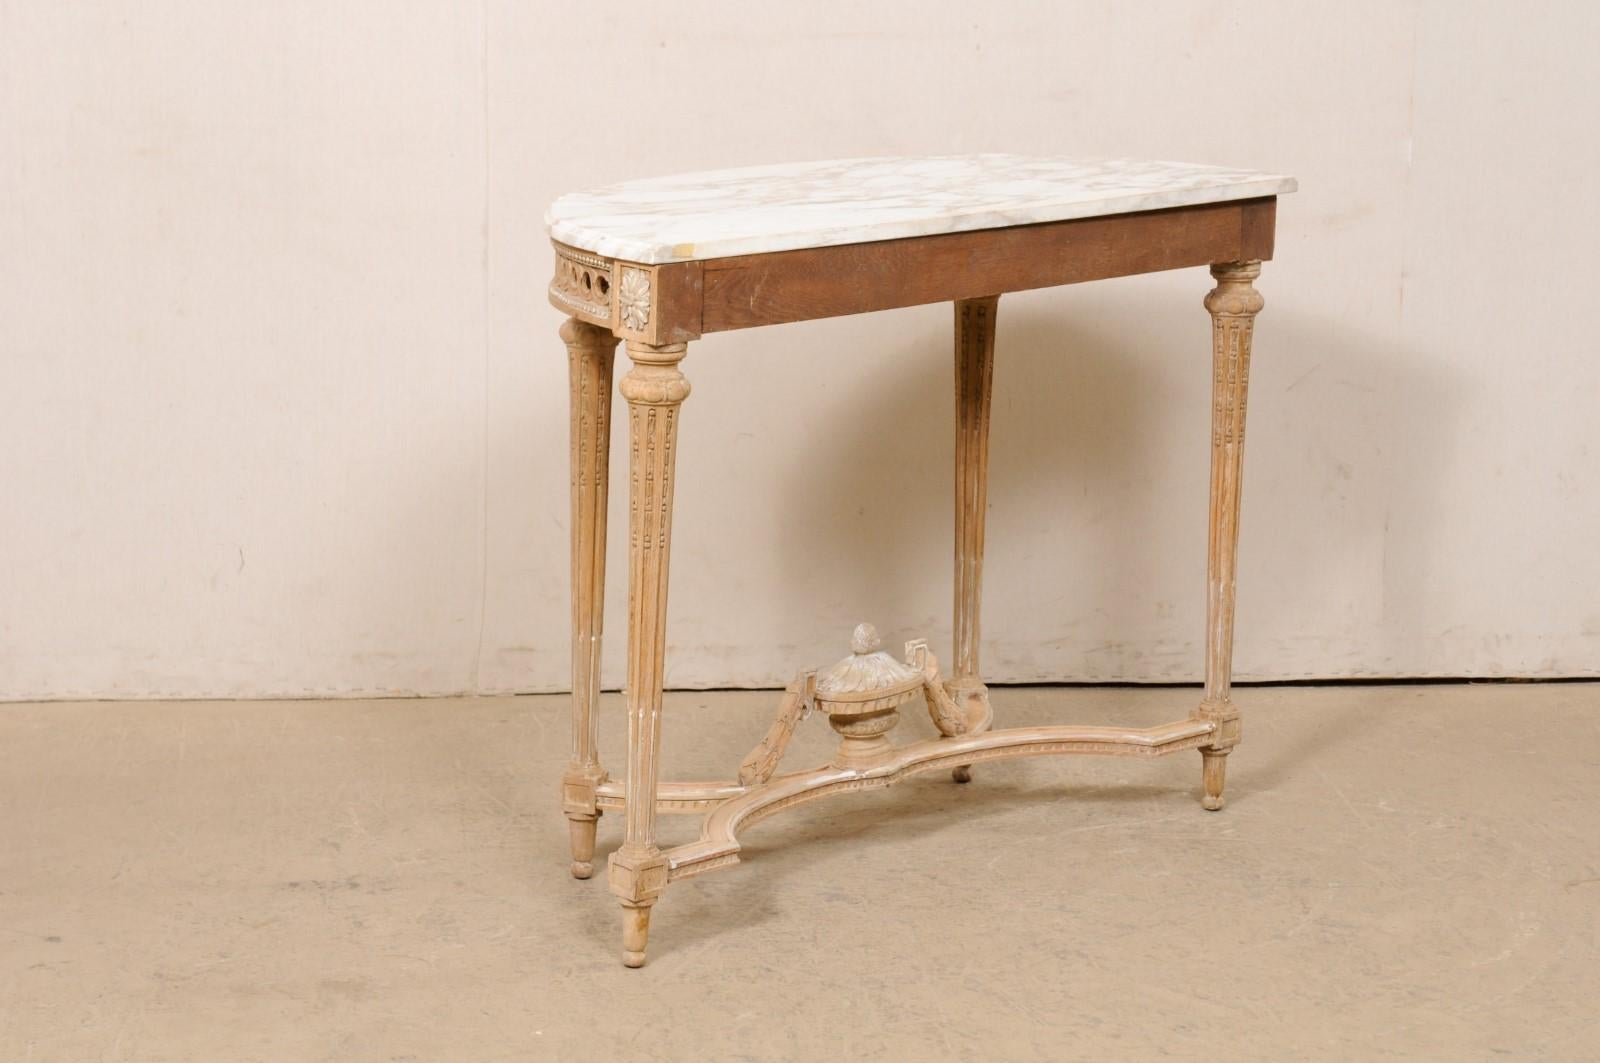 French Neoclassic Style Marble-Top Console Table W/Nice Urn Finial at Underside For Sale 4